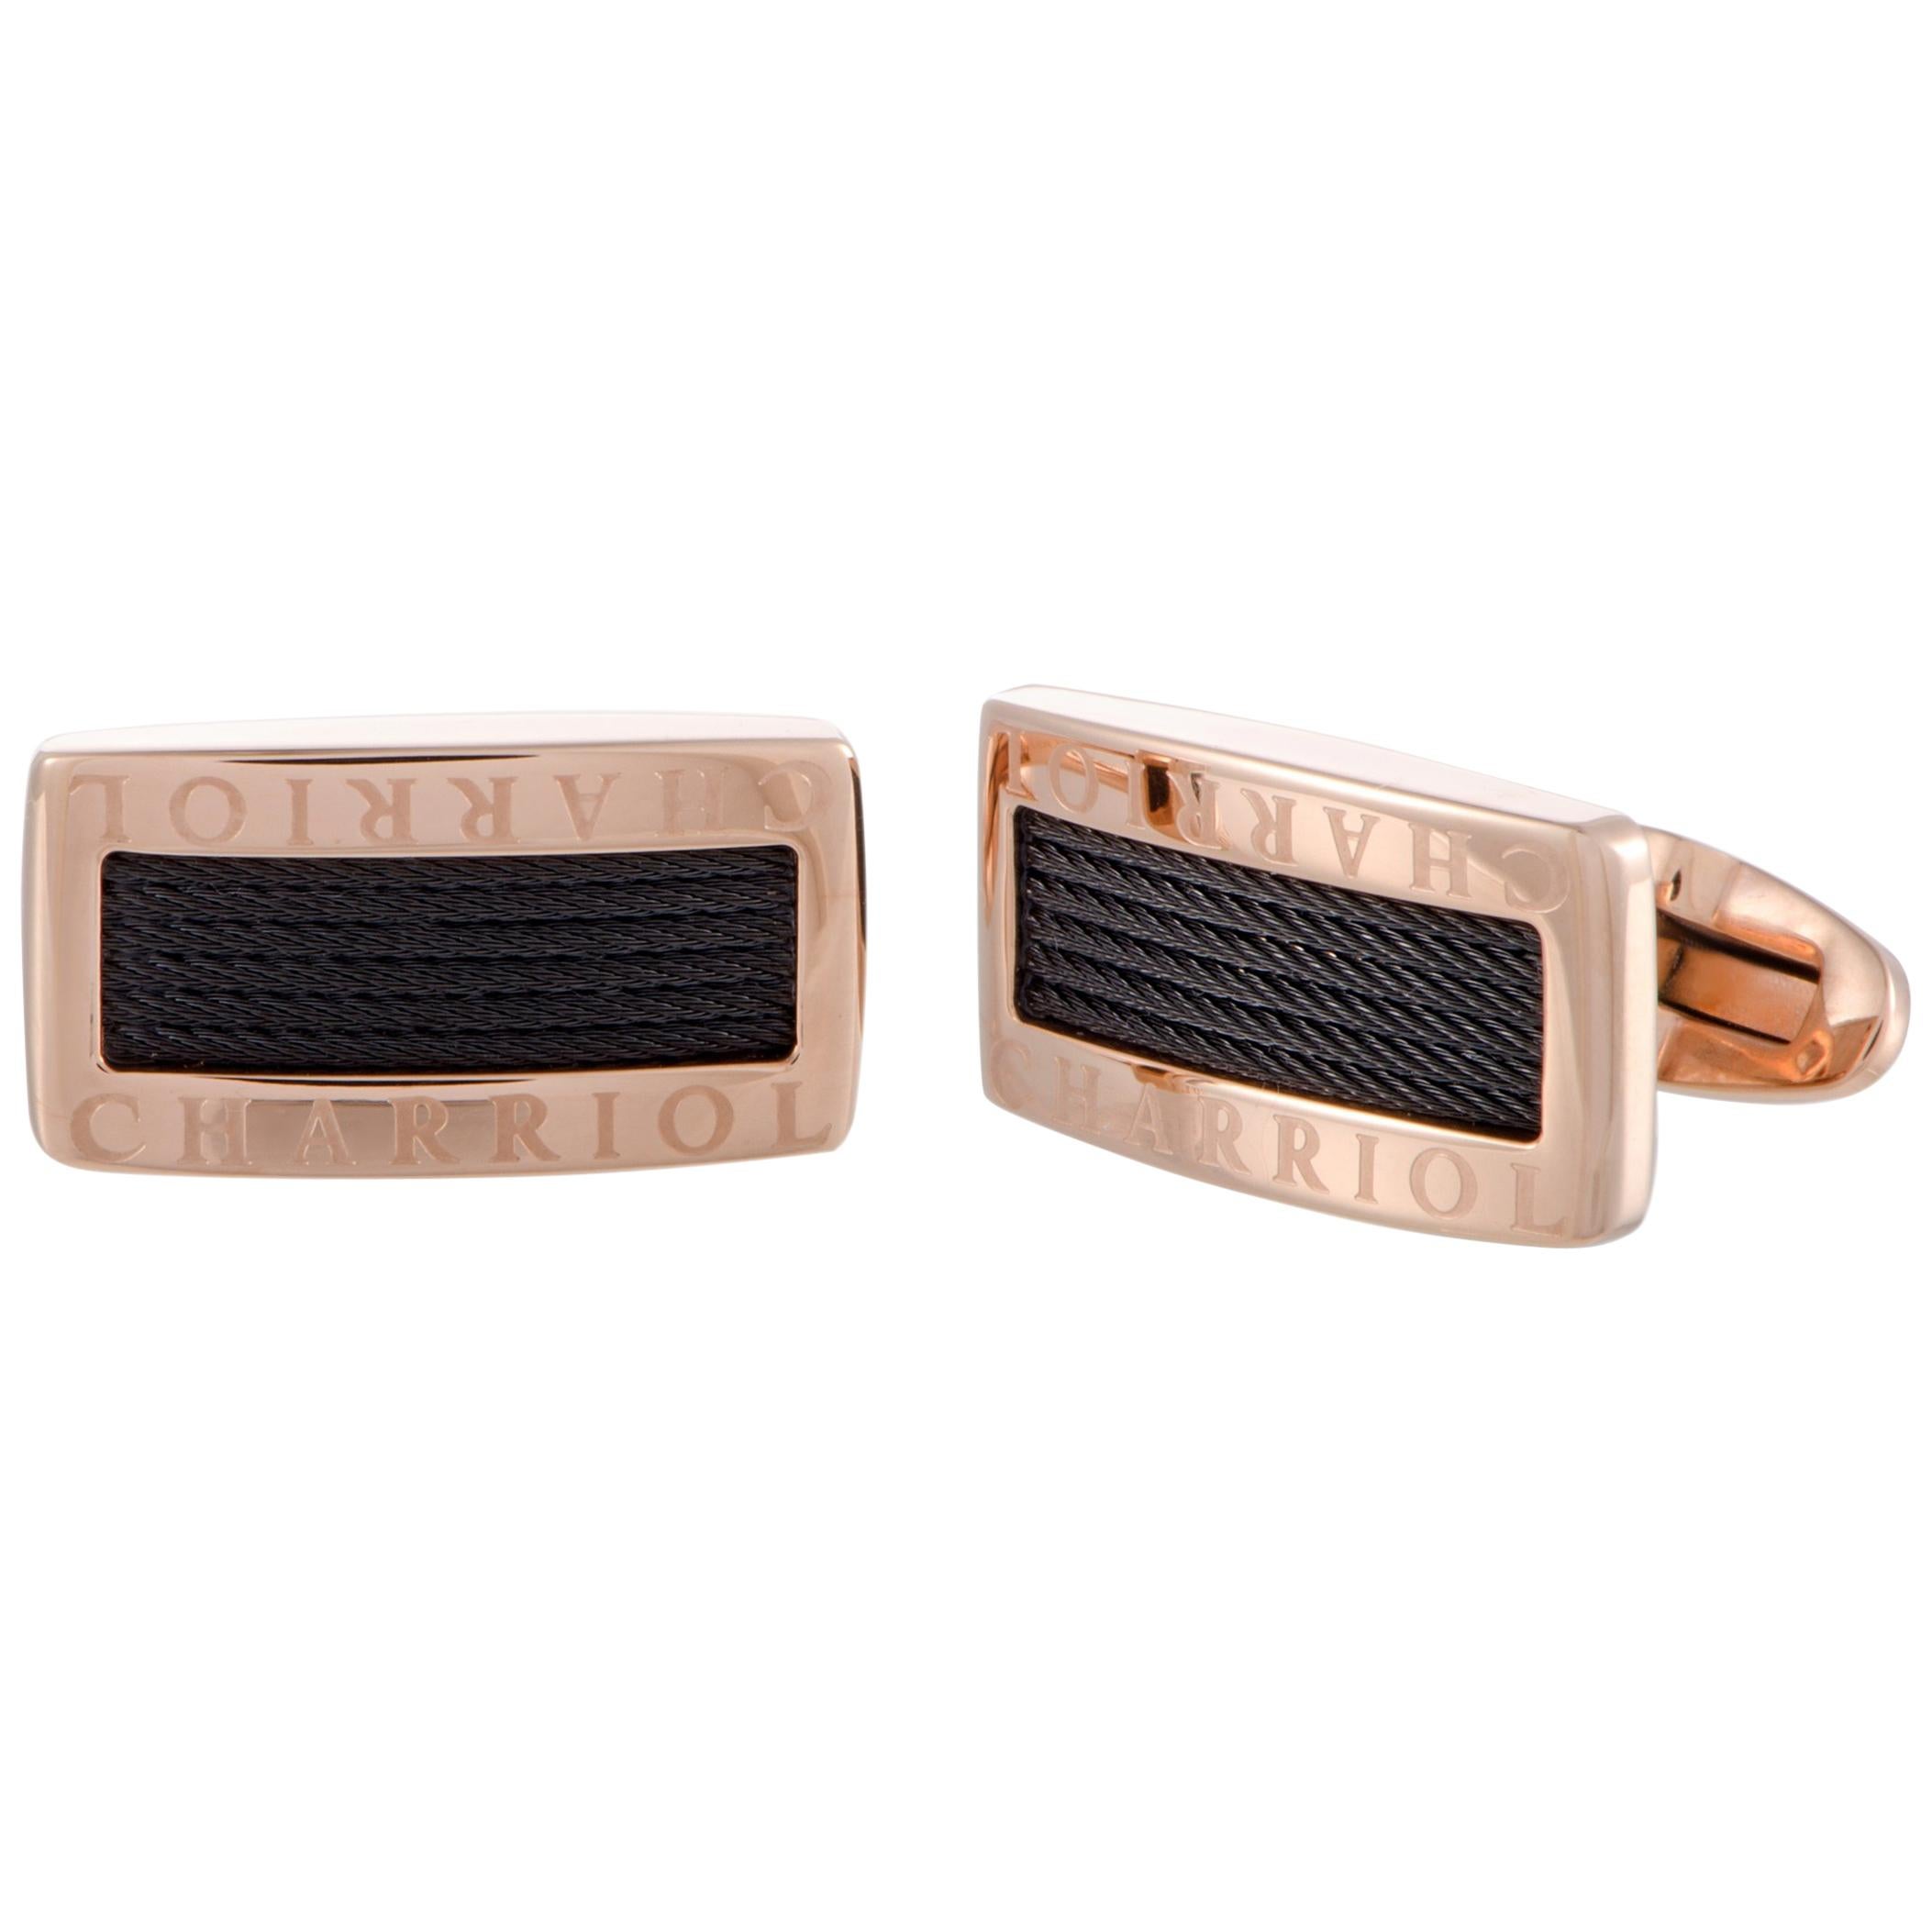 Charriol Celtic Stainless Steel, Gold and Black Rhodium Plated Cufflinks